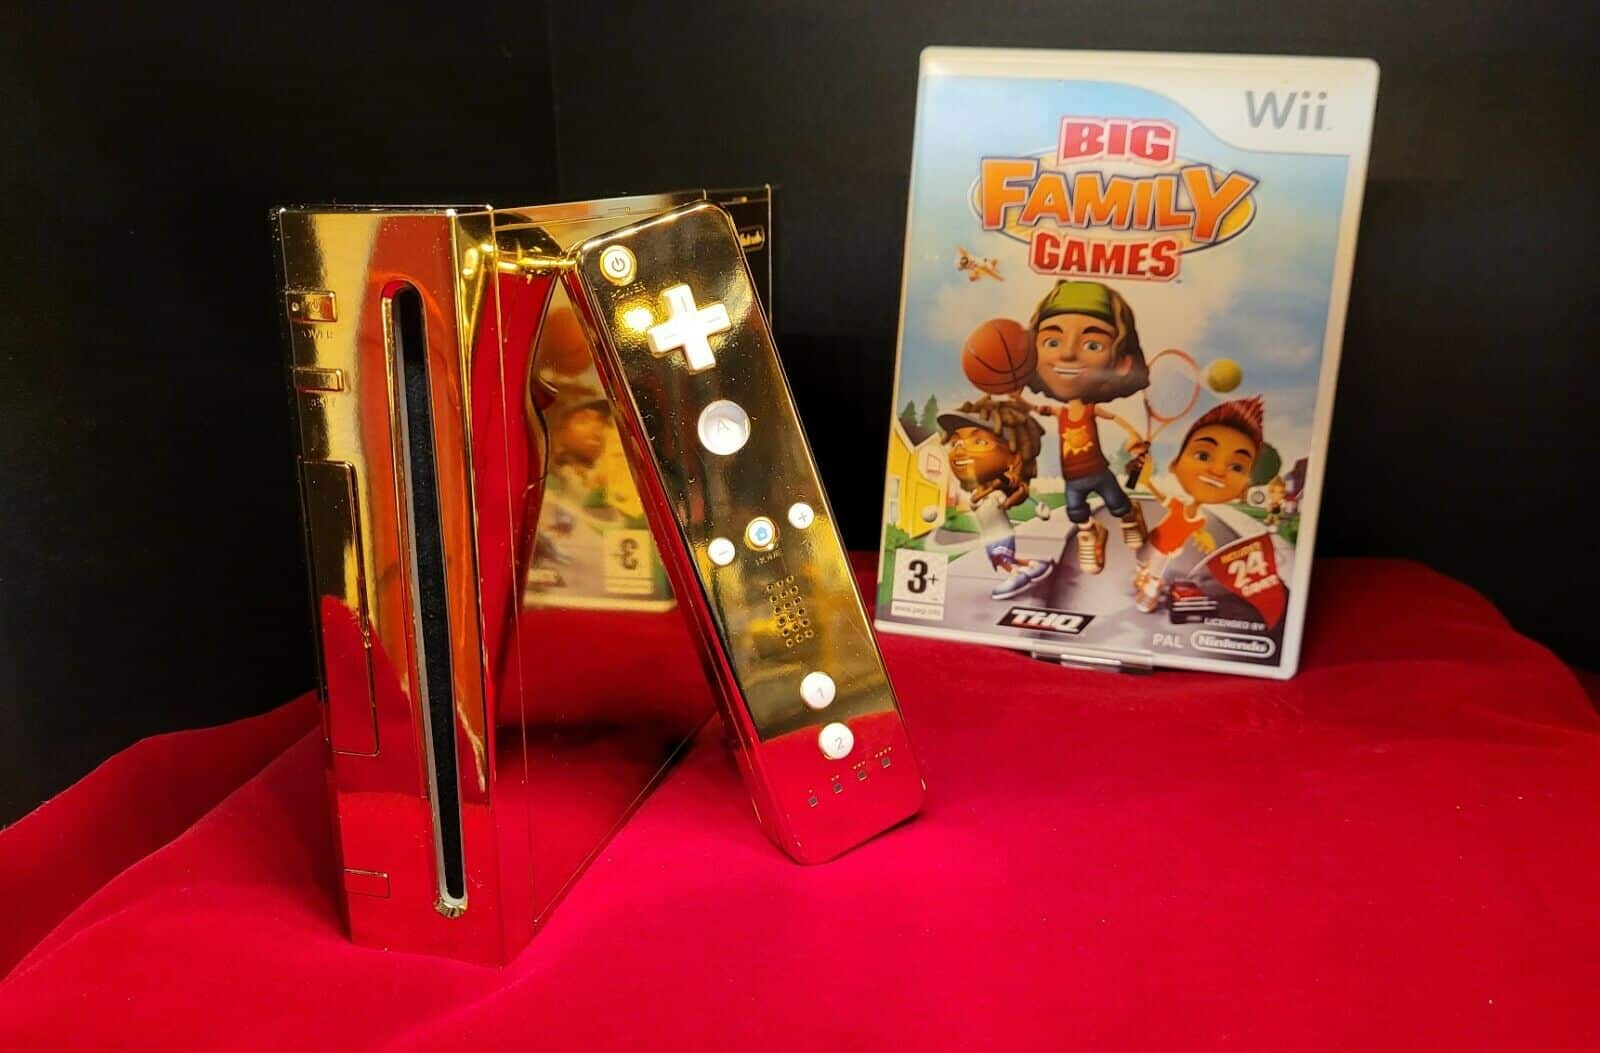 The Queen's Golden Nintendo Wii is up for auction (again)